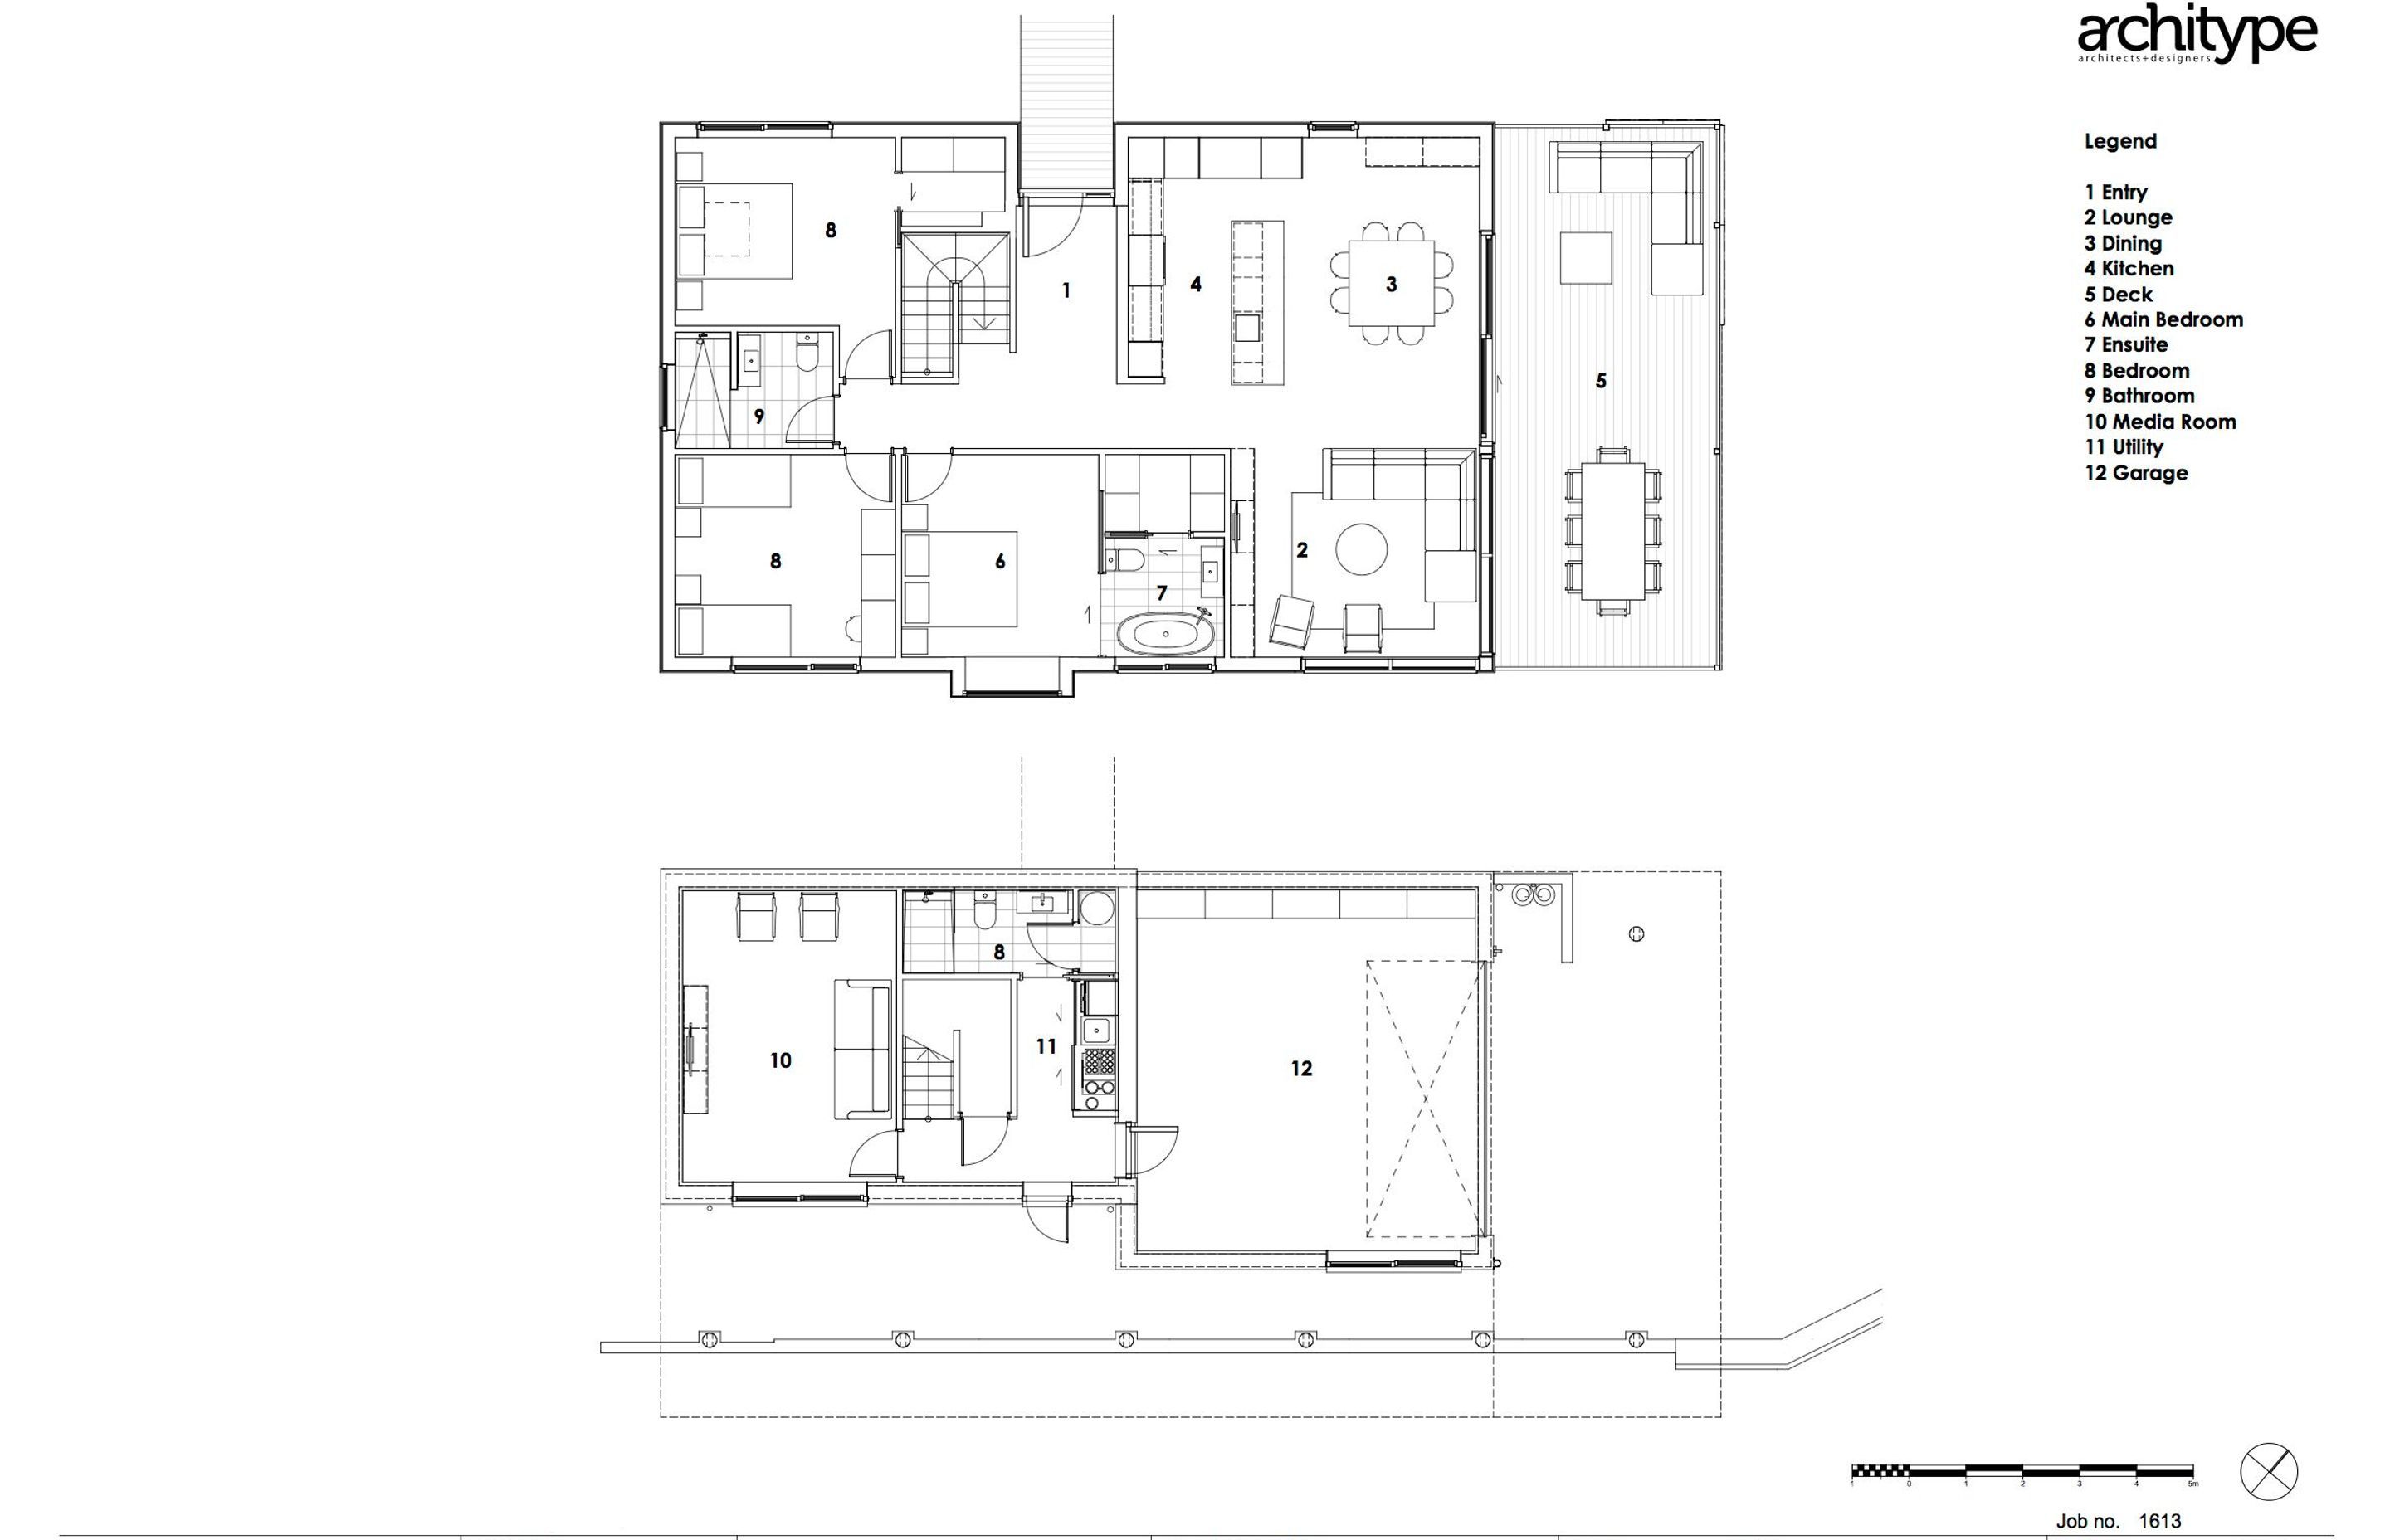 Floor plans by Architype.